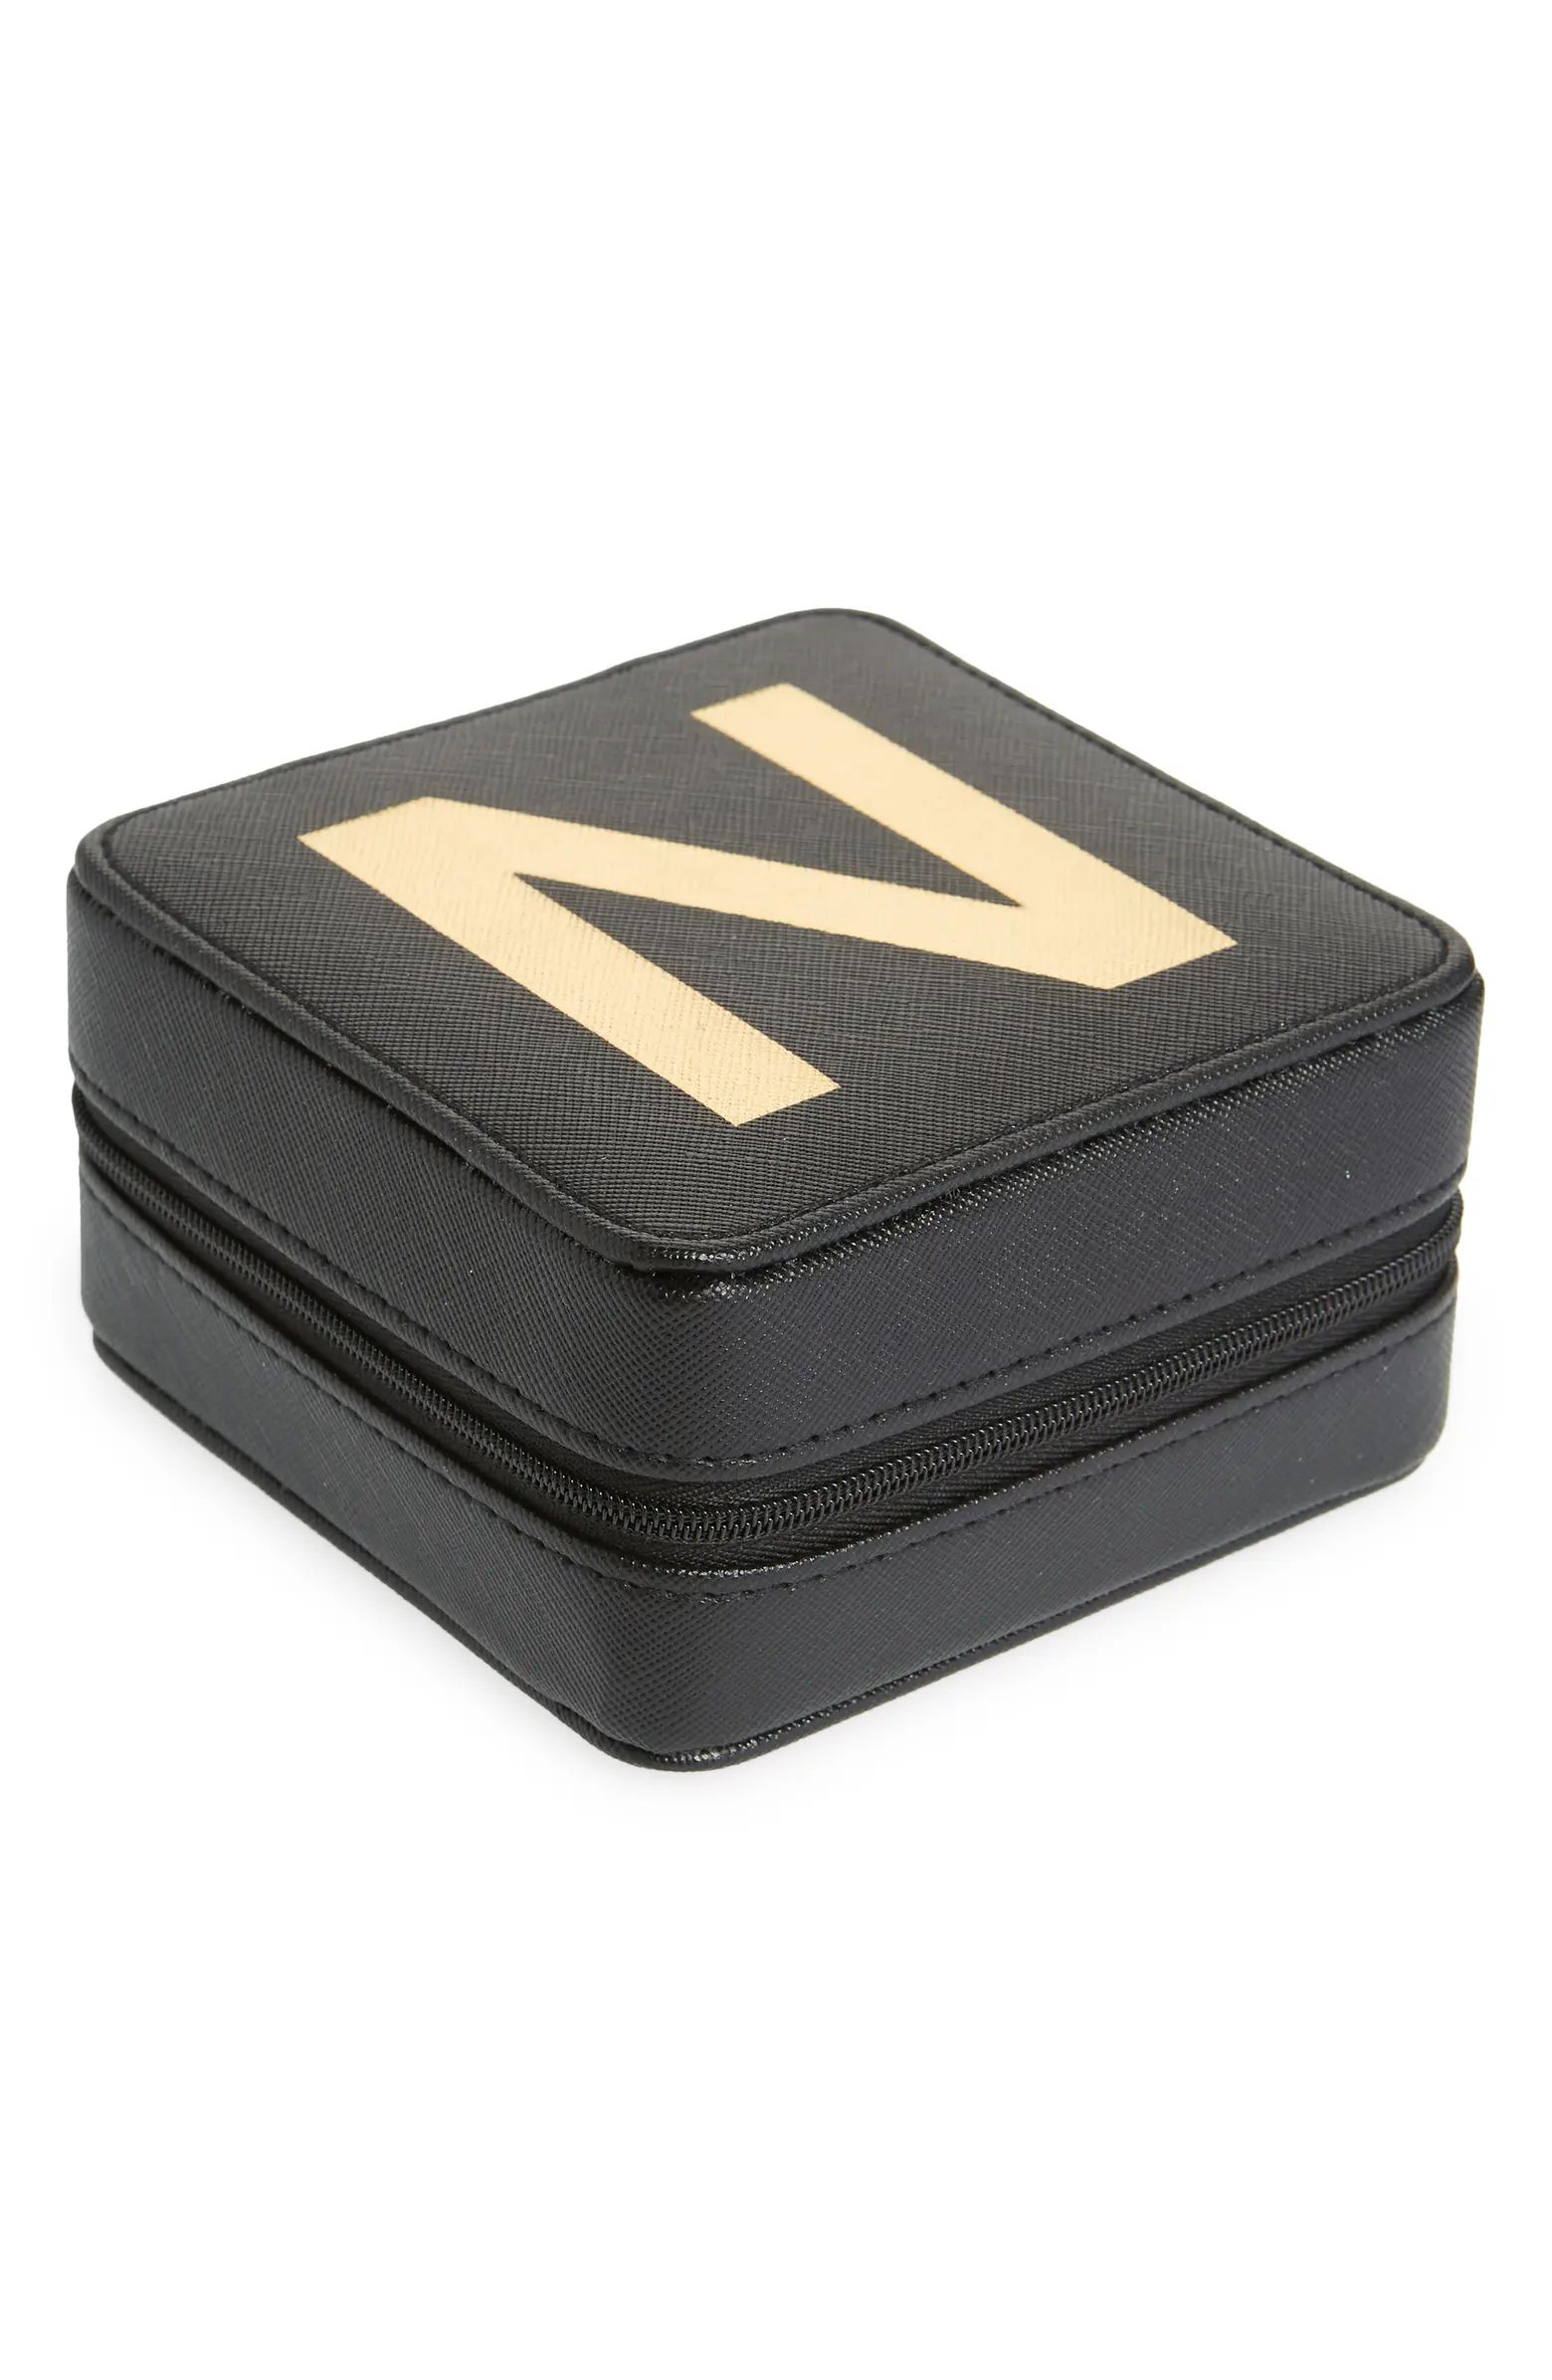 Initial Square Jewelry Box | Nordstrom